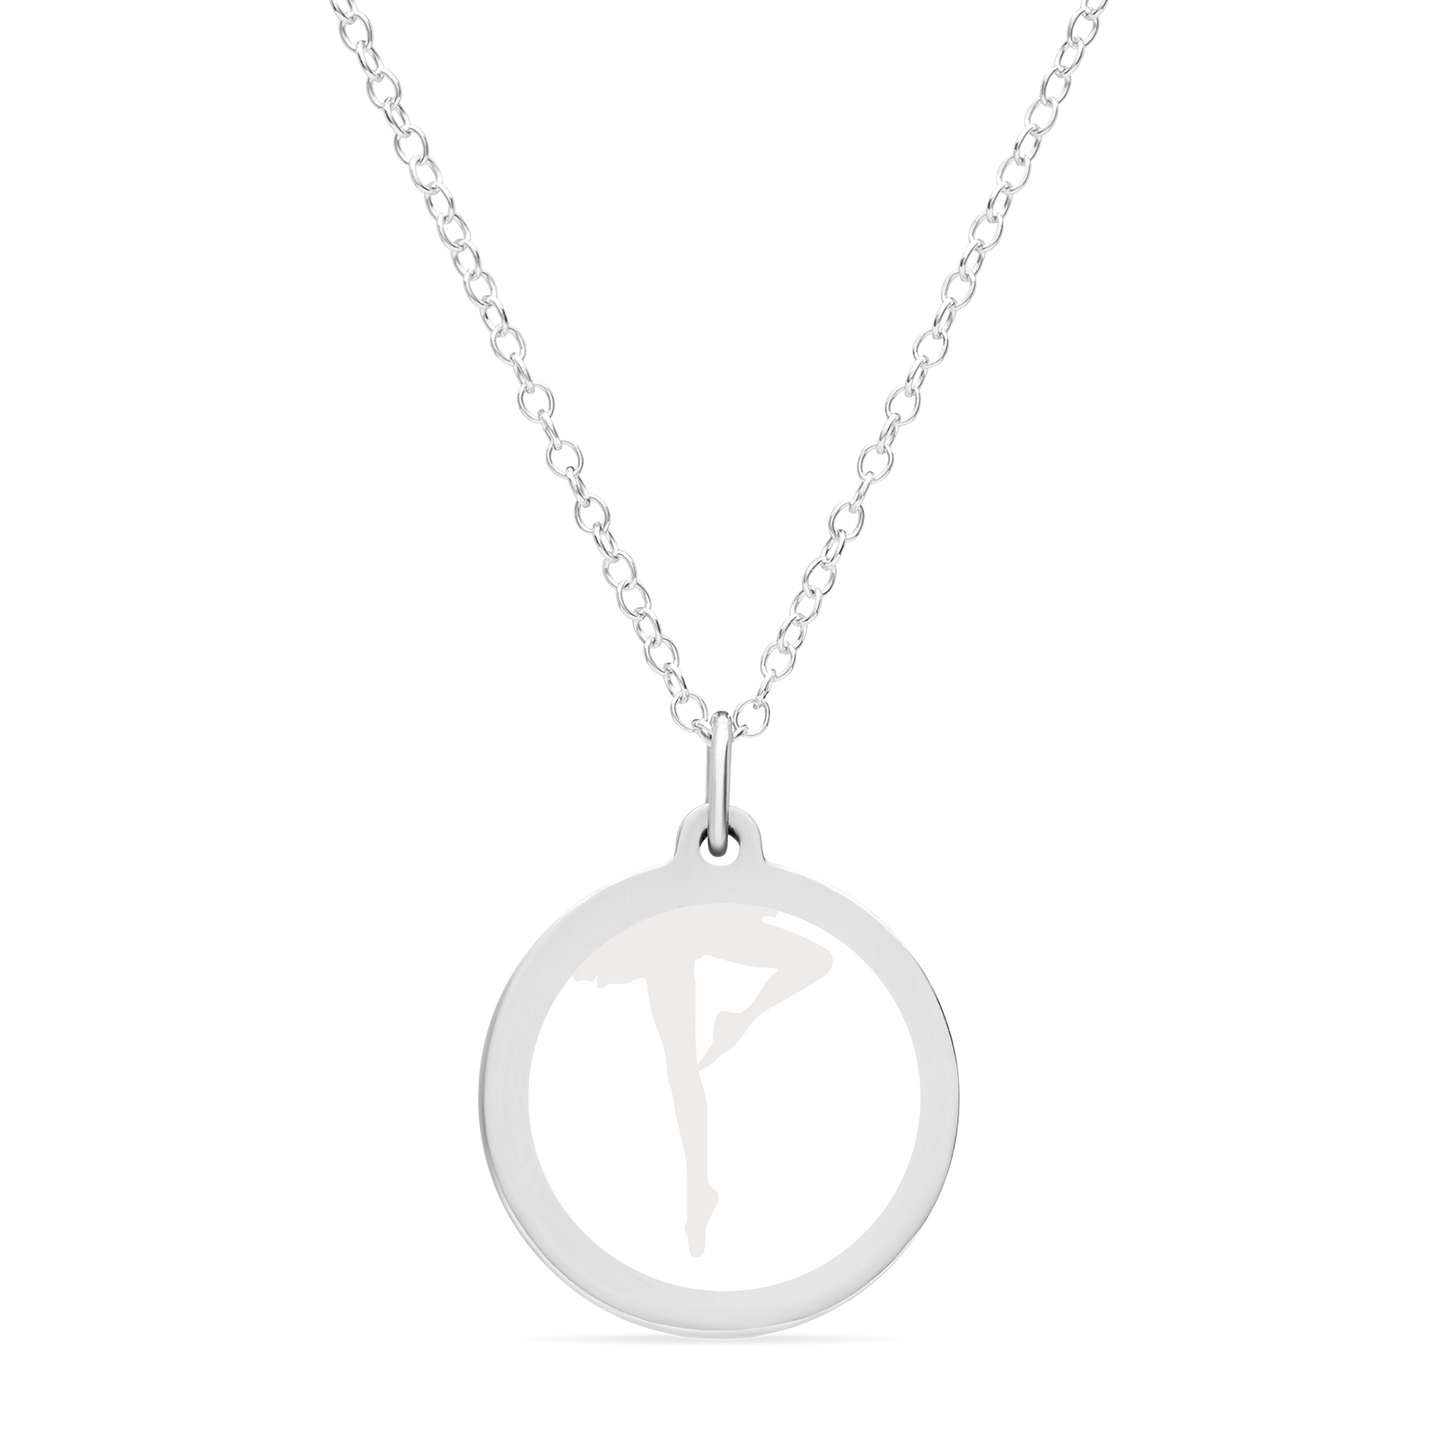 ORIGINAL BALLERINA CHARM in sterling silver with rhodium plate